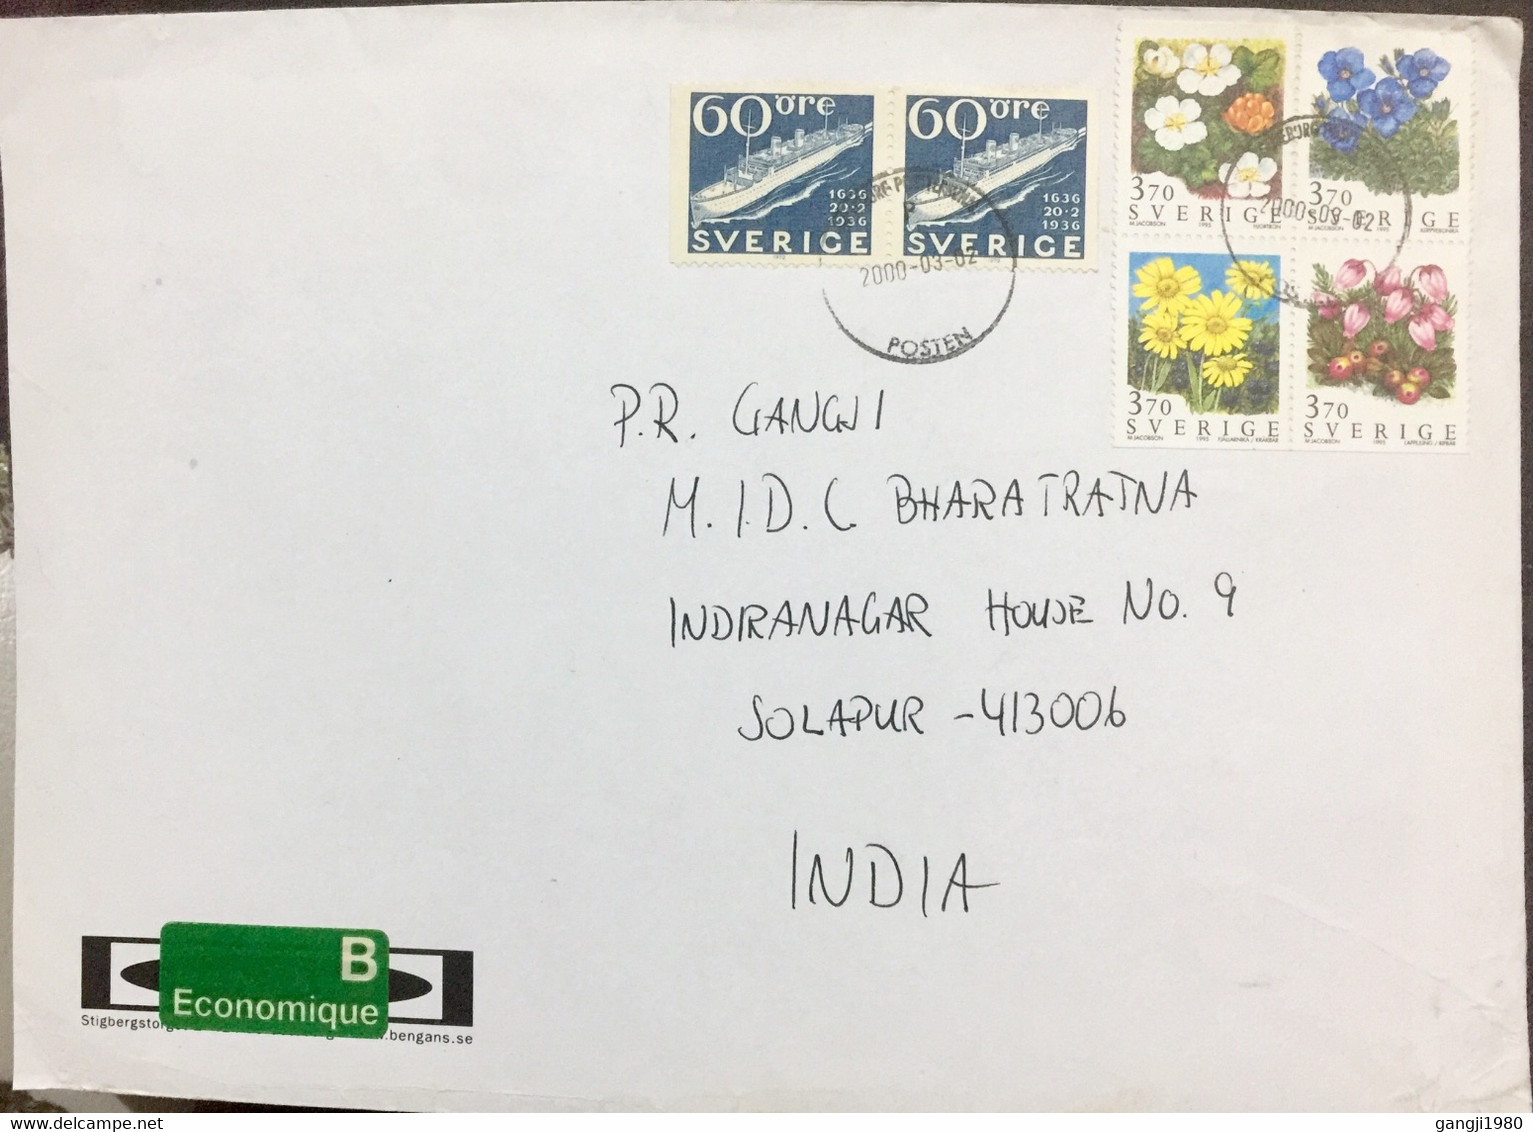 SWEDEN 2000, COVER VIGNETTE ECONOMIQUE GREEN LABEL USED TO INDIA,STAMPS 4 STAMPS FLOWERS BLOCK,SHIP PAIR - Briefe U. Dokumente